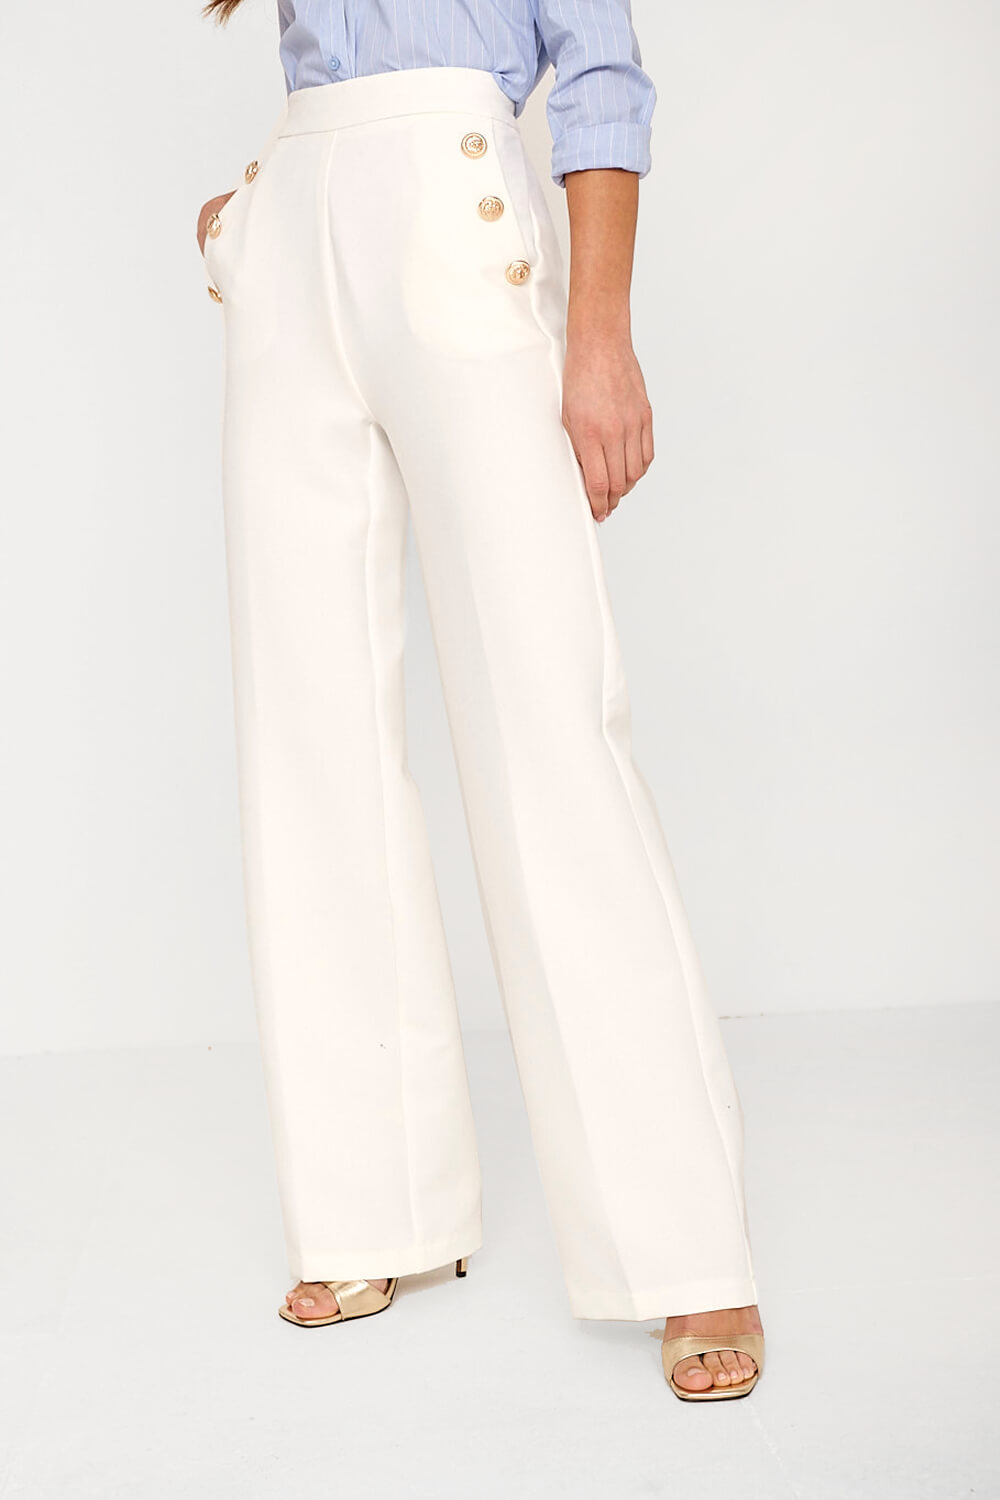 Sailor Wide Leg Trousers in White | iCLOTHING - iCLOTHING